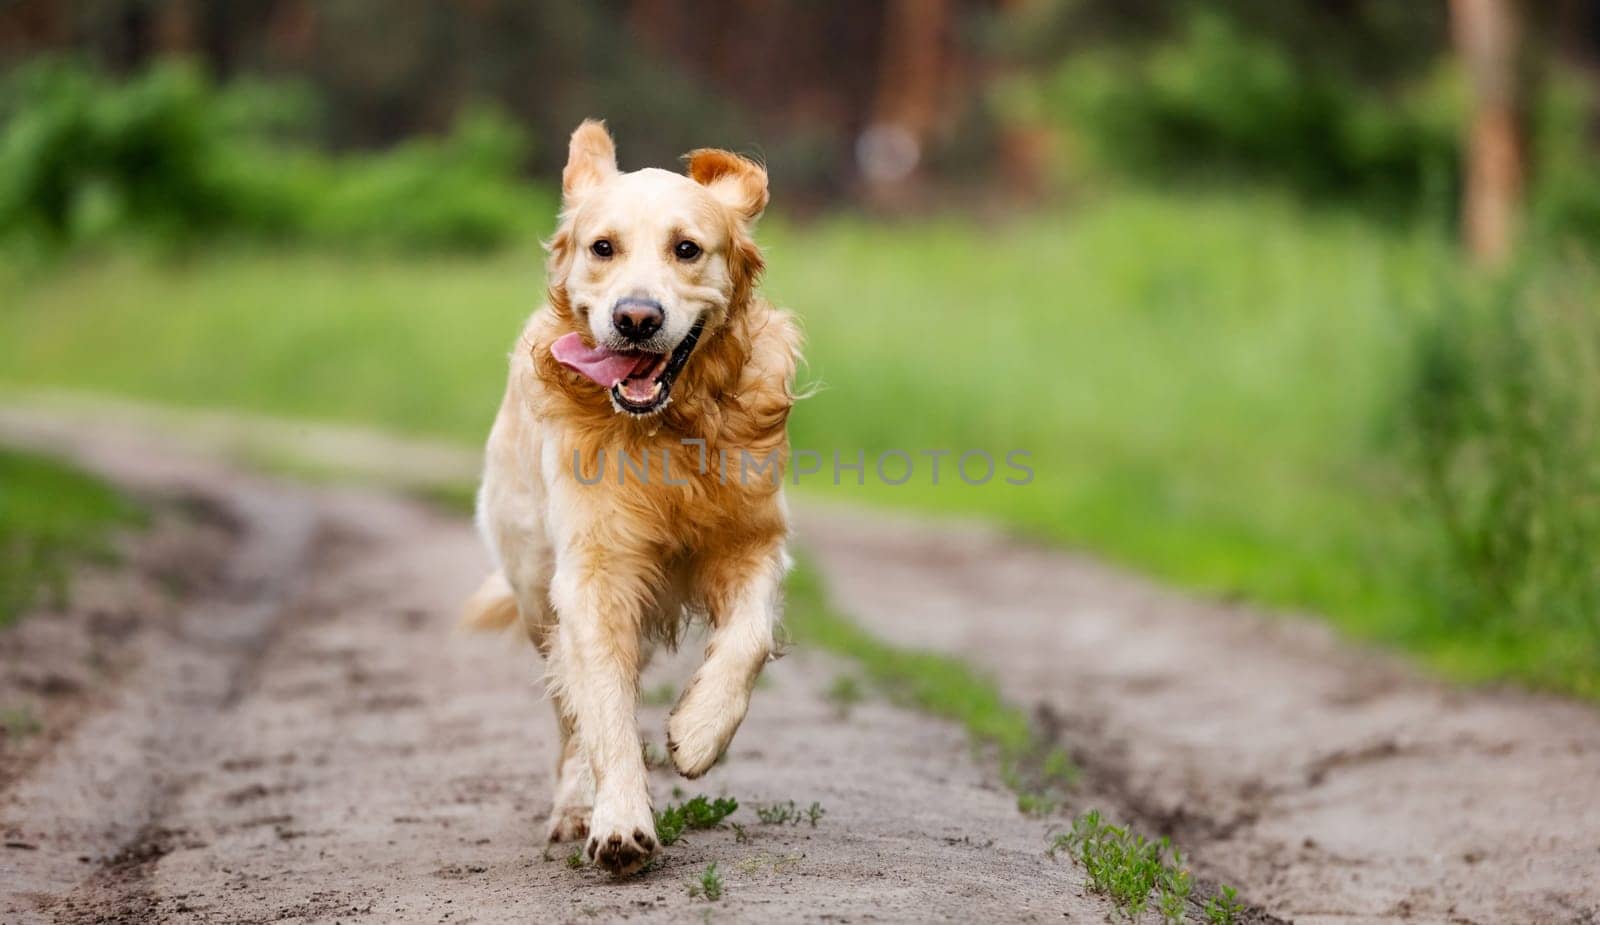 Golden retriever dog running outdoors in sunny day. Purebred doggie pet labrador at nature